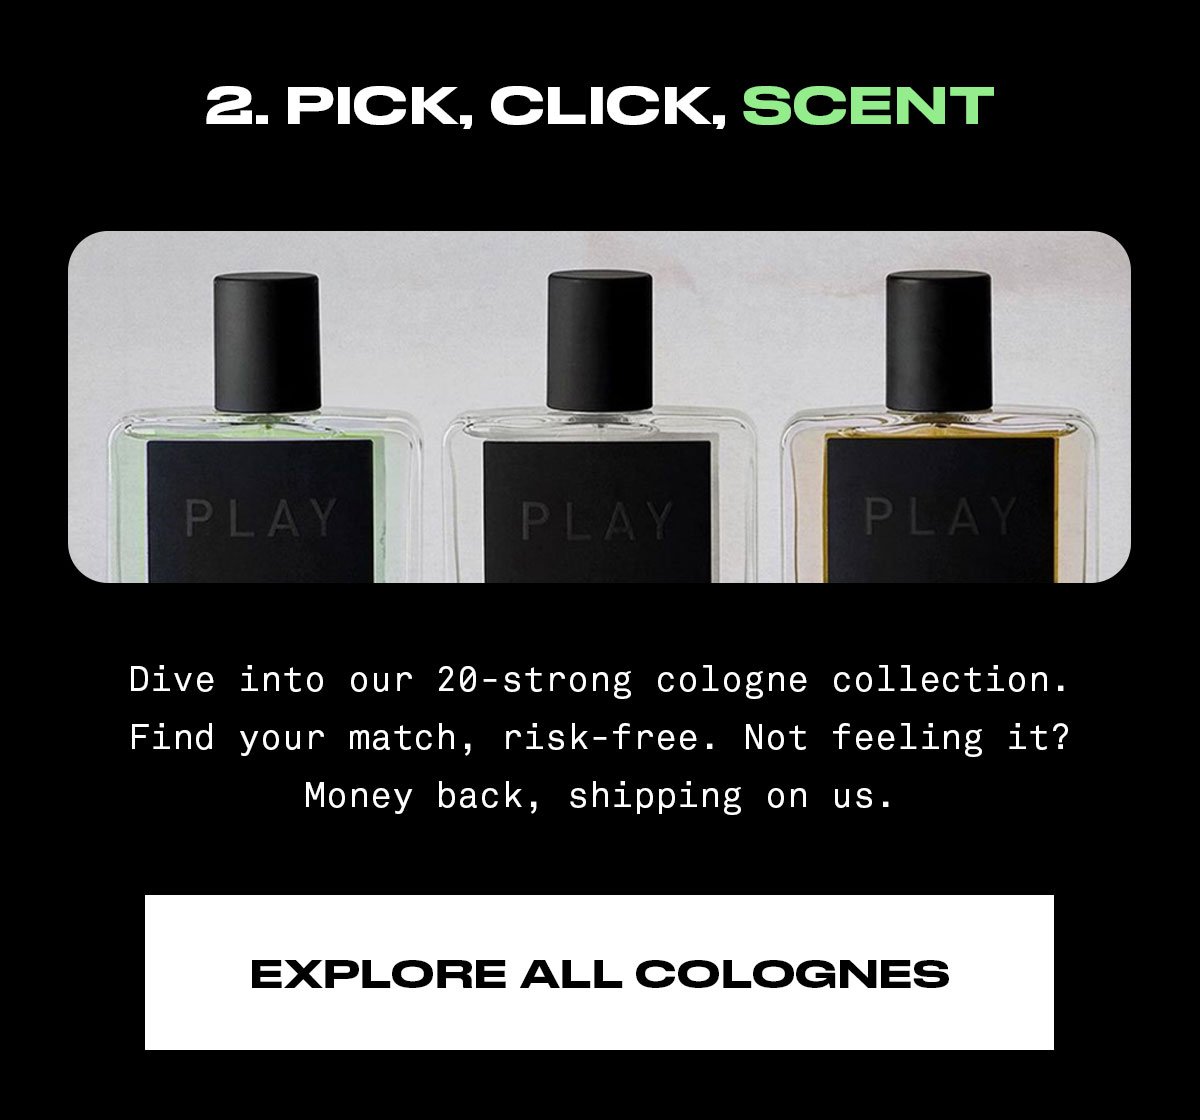 Pick, click, scent Dive into our 20-strong cologne collection. Find your match, risk-free. Not feeling it? Money back, shipping on us.